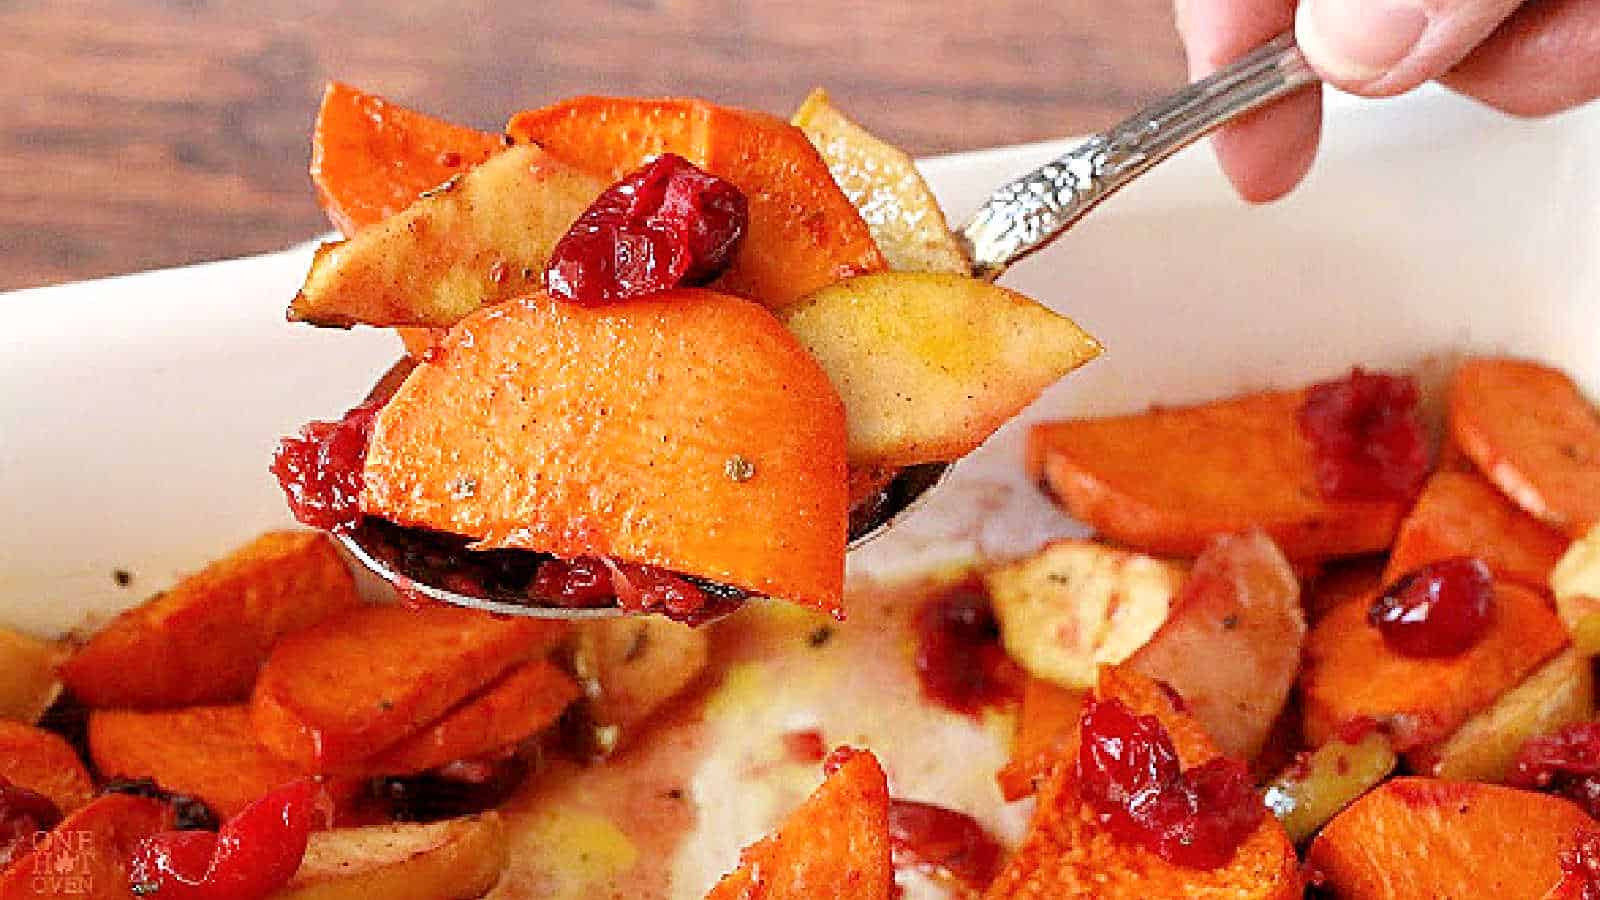 A spoonful of sweet potato slices with apples and cranberries in a white dish.